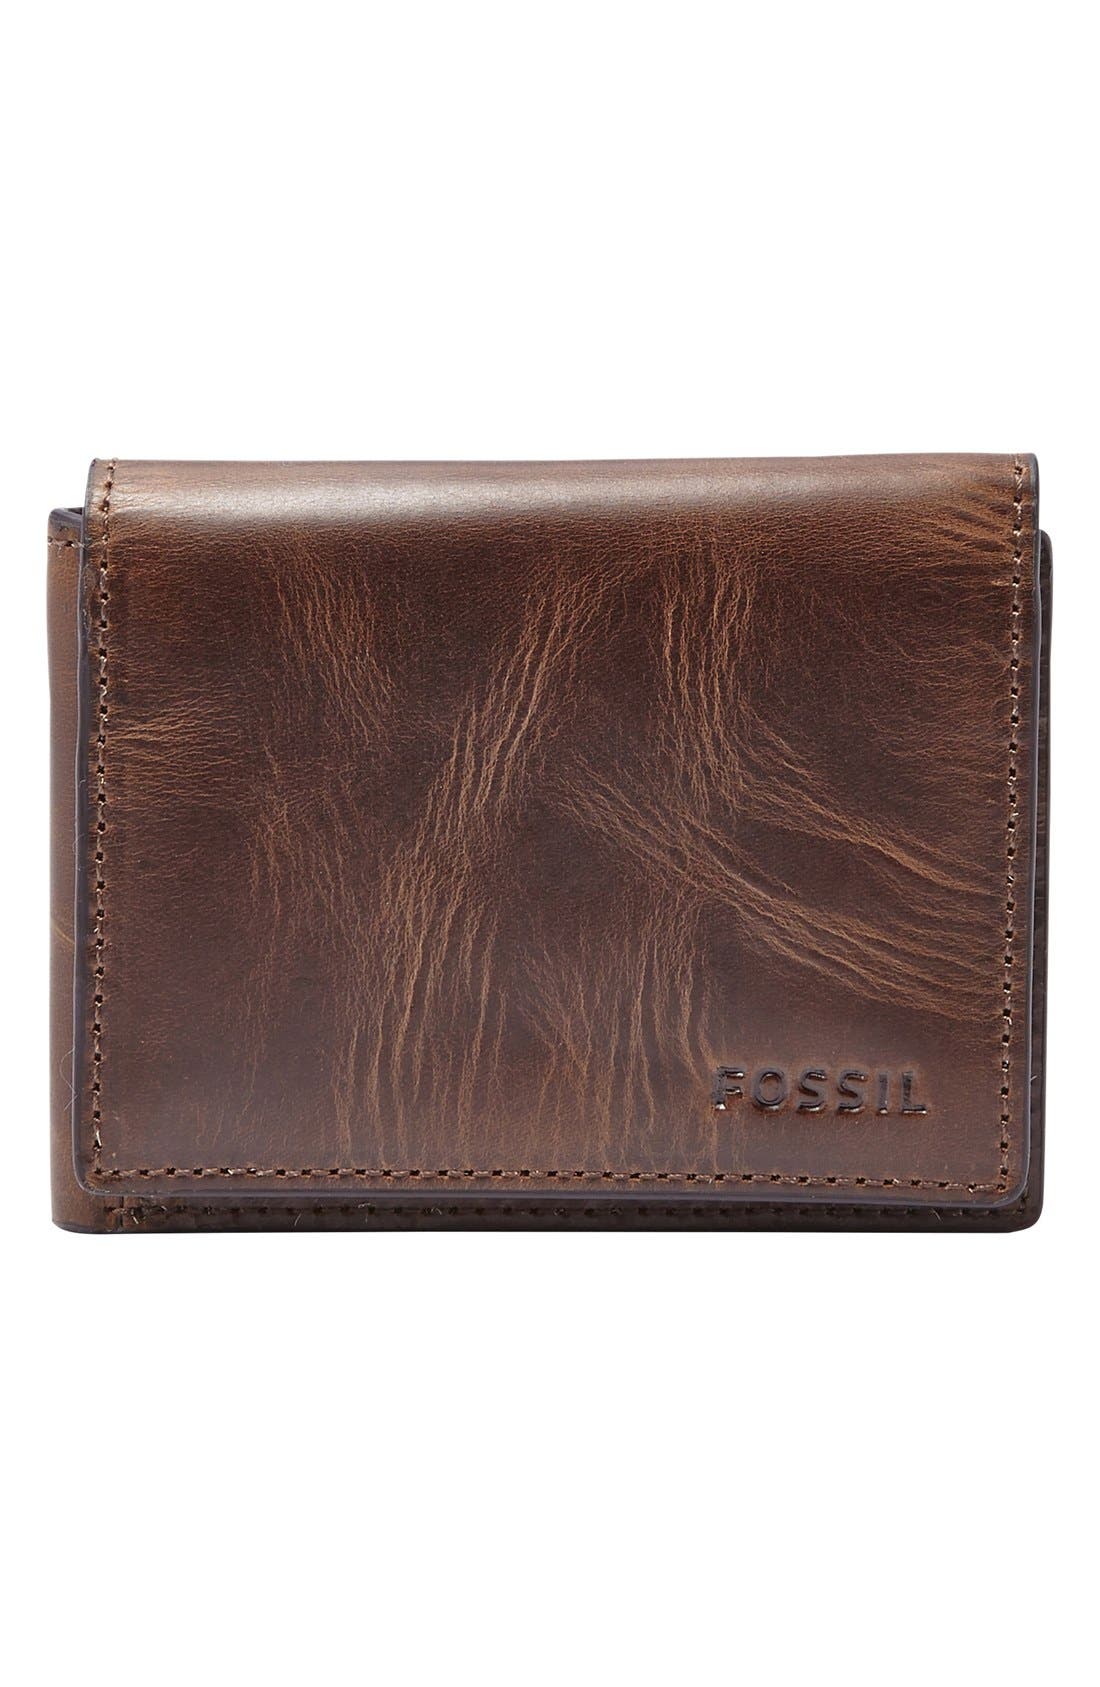 UPC 762346315476 product image for Men's Fossil 'Derrick' Leather Flip Trifold Wallet - Brown | upcitemdb.com